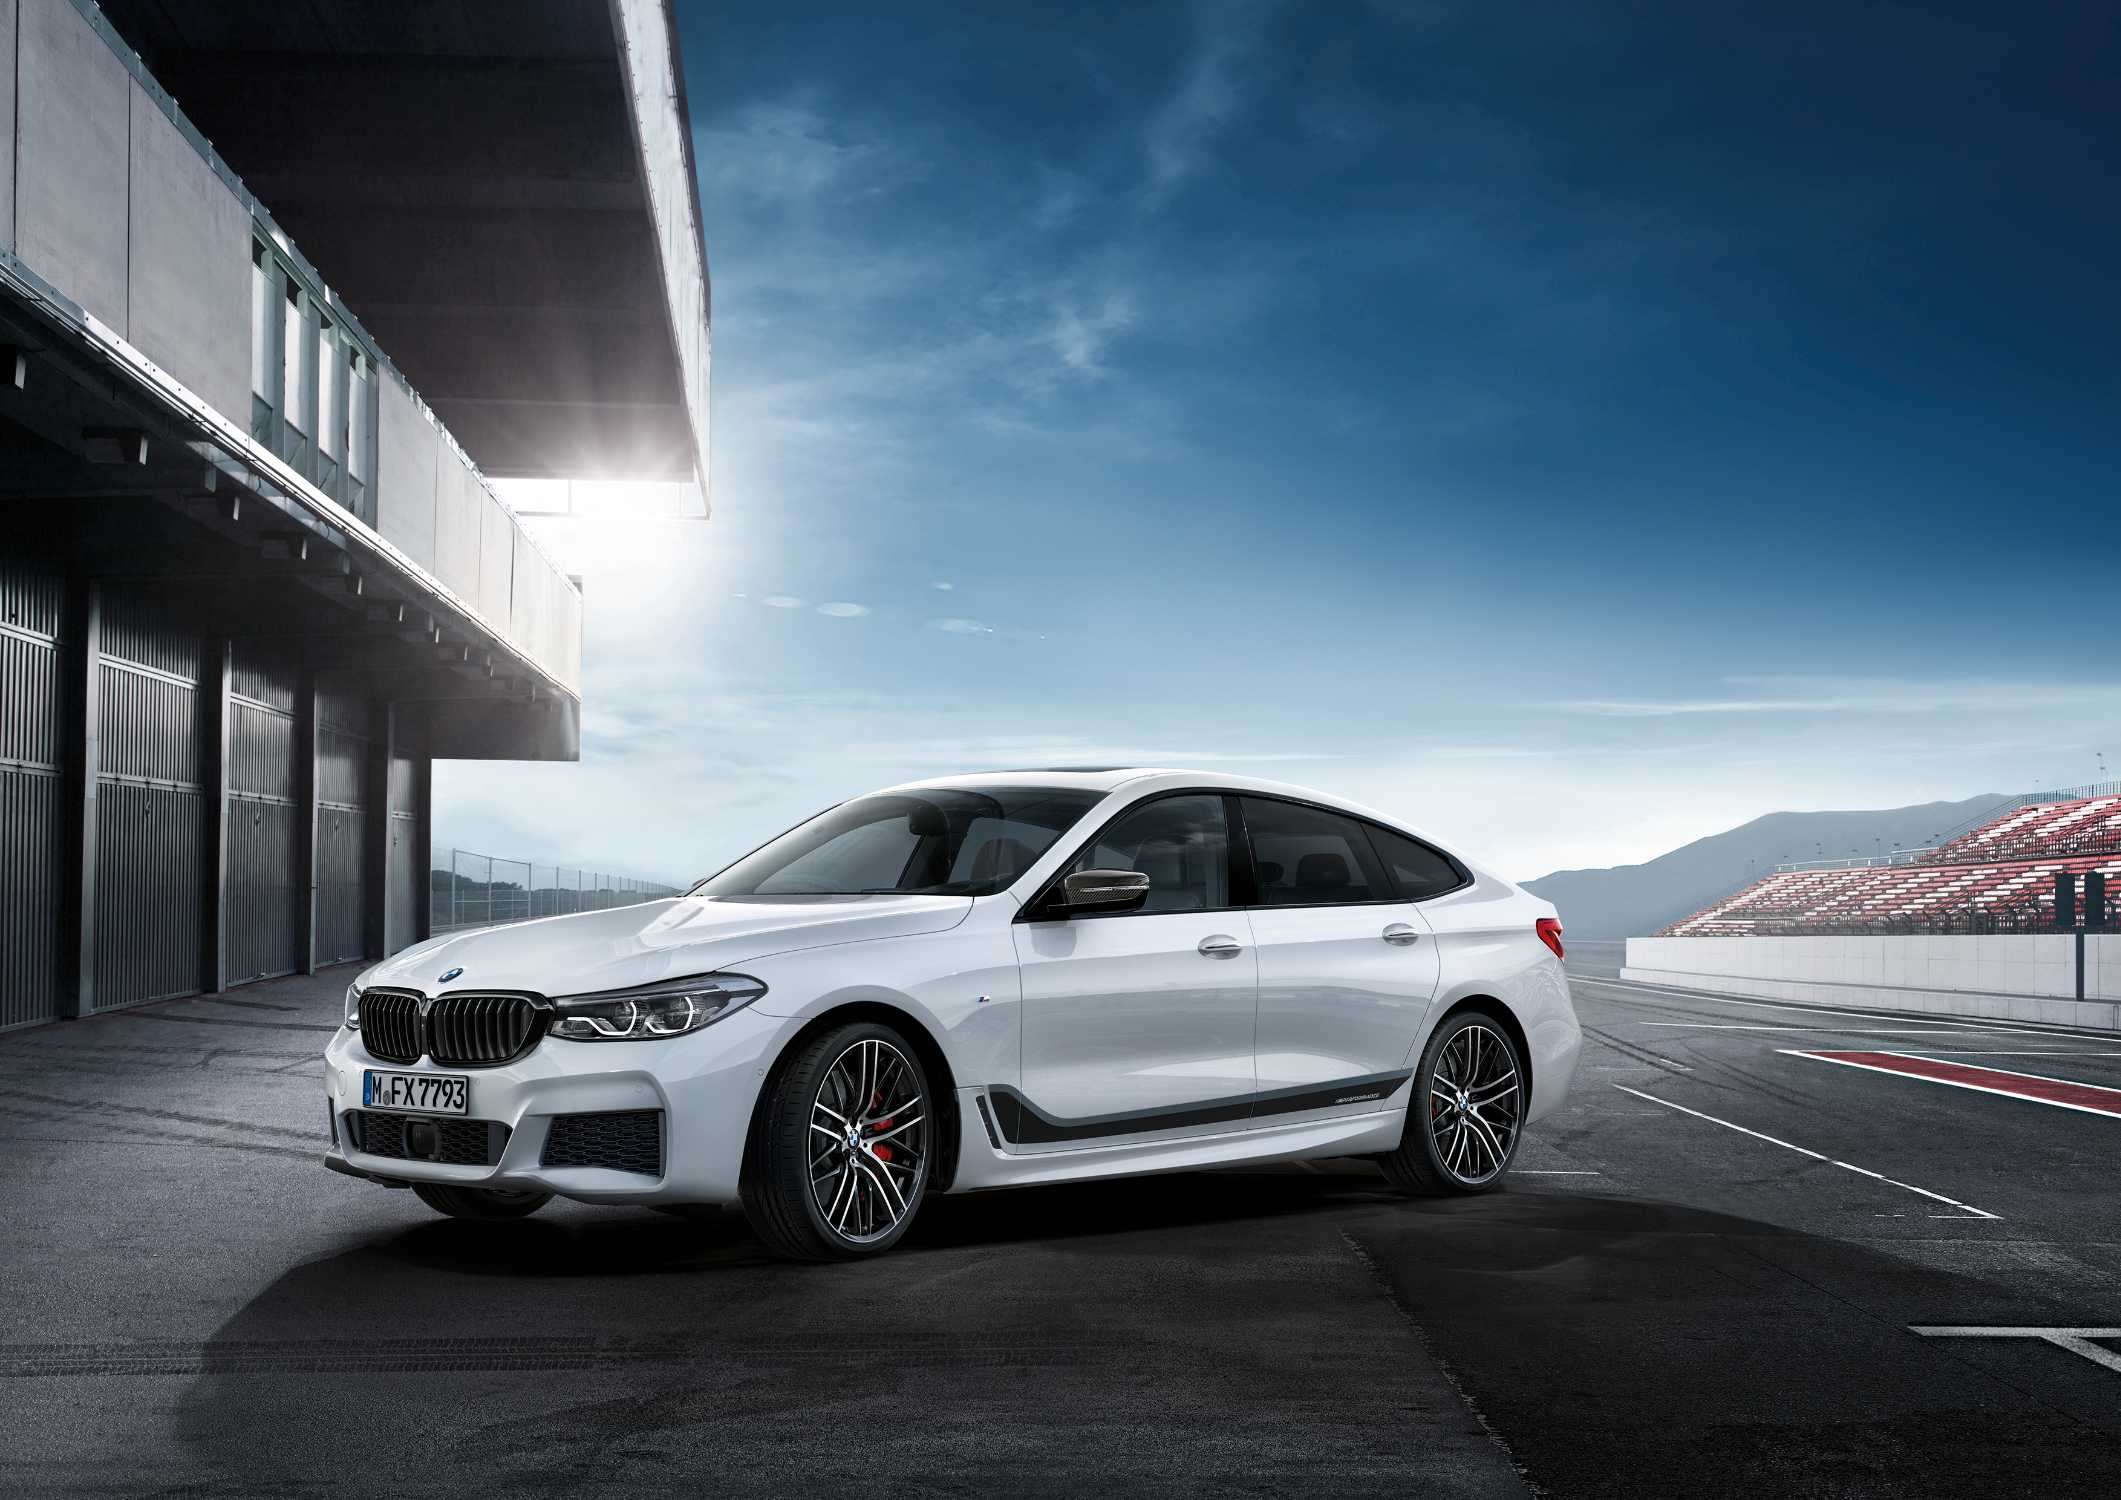 BMW M Performance Parts for the new BMW 6 Series Gran Turismo